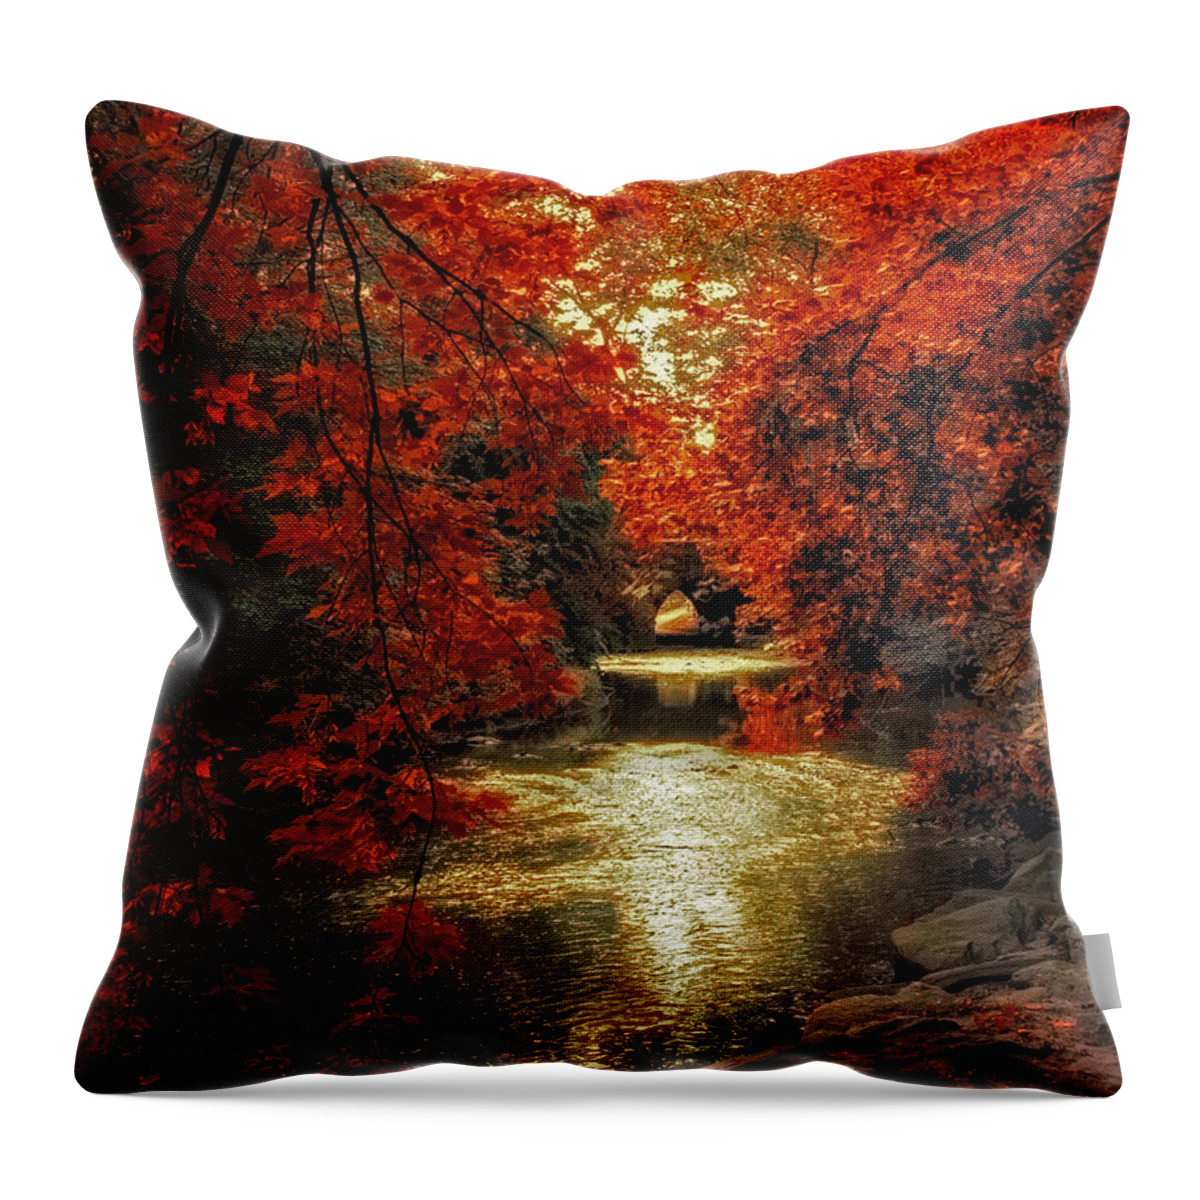 Autumn Throw Pillow featuring the photograph Riverbank Red by Jessica Jenney